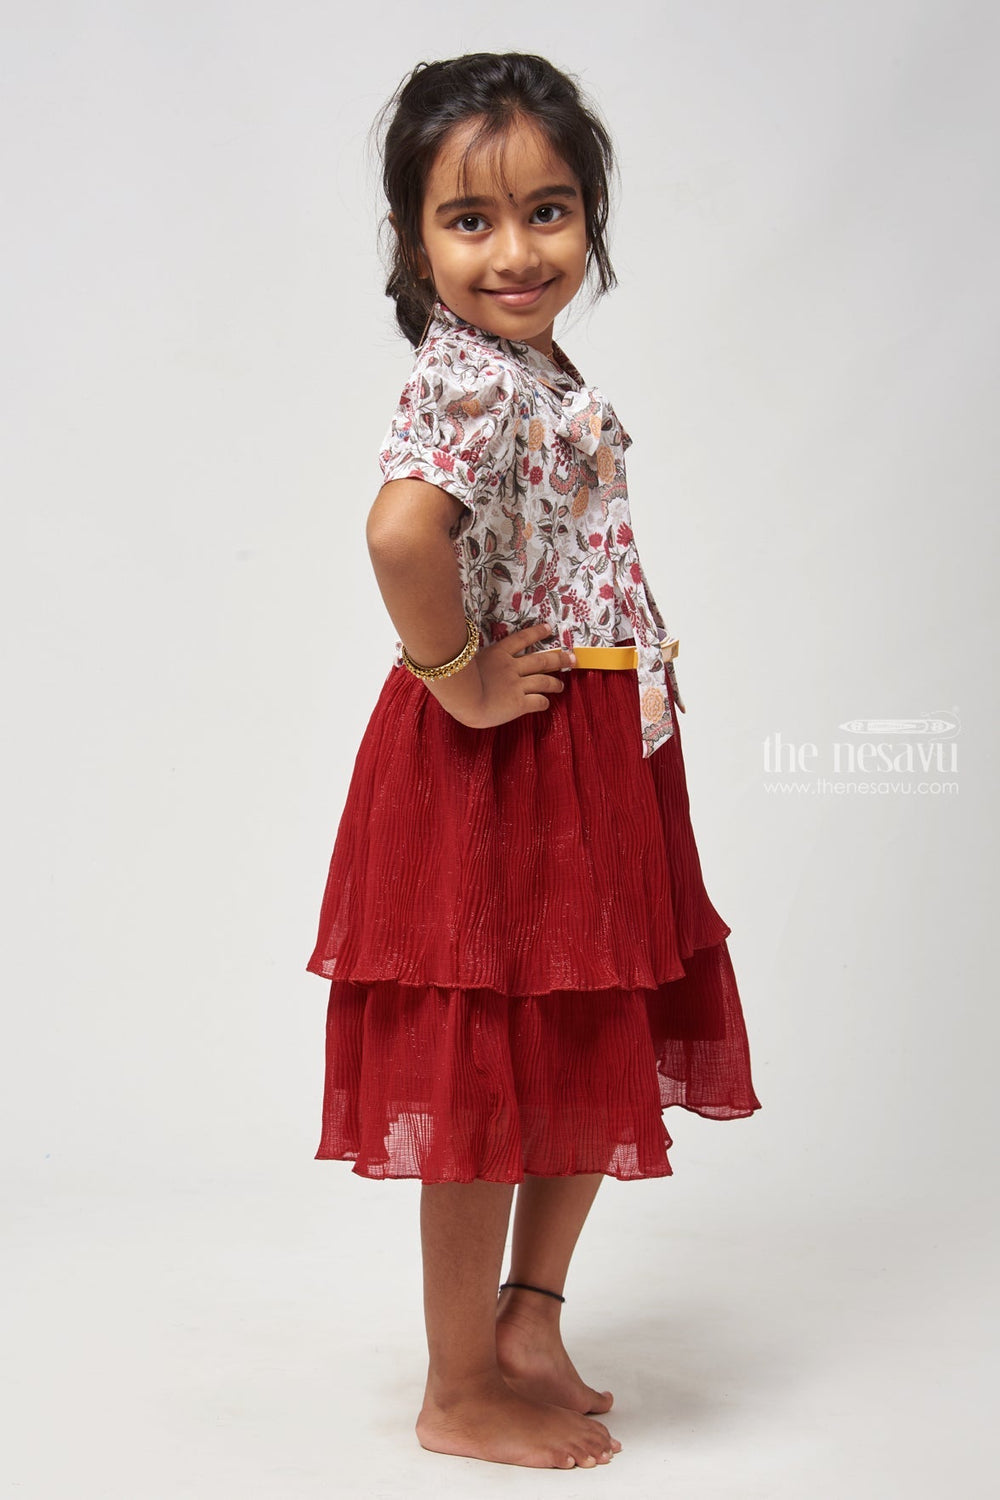 The Nesavu Frocks & Dresses Red Double Layer Flared Frock - Floral Tie Neck & Chic Look Nesavu Floral Printed Tie neck Frock | Girls Cotton Frock | The Nesavu